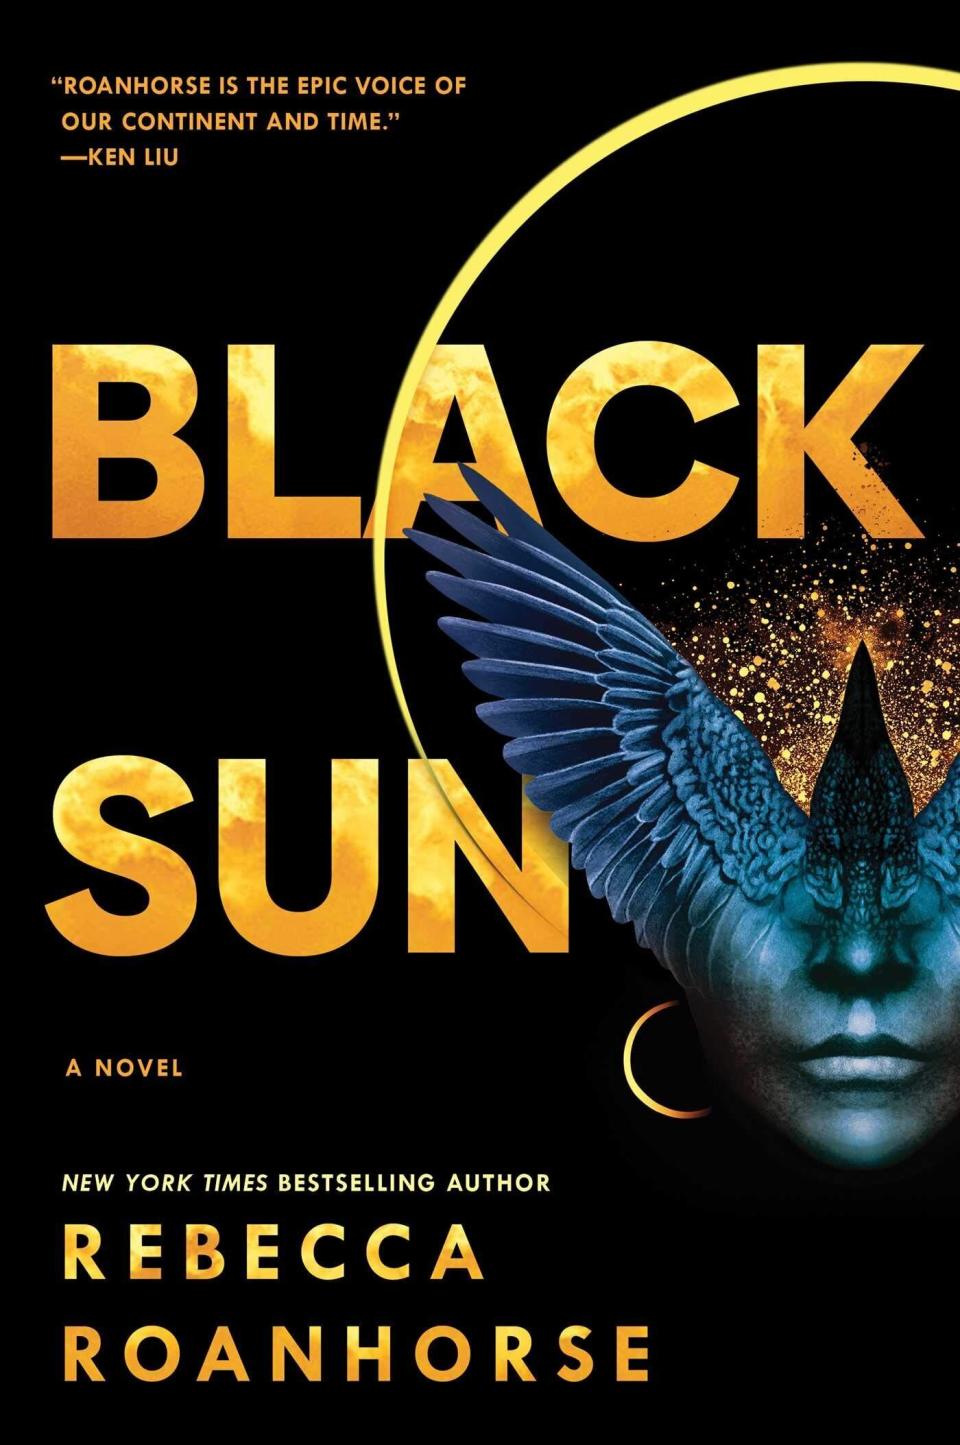 The first novel in a new series, &ldquo;Black Sun&rdquo; follows disgraced captain Xiala as her ship sets off for the distant city of Tova on the eve of a prophesied rare celestial event. She has only one passenger, a young man who is blind, scarred and cloaked in destiny. &ldquo;Crafted with unforgettable characters, Rebecca Roanhorse has created an epic adventure exploring the decadence of power amidst the weight of history and the struggle of individuals swimming against the confines of society and their broken pasts.&rdquo; Read more about it on <a href="https://www.goodreads.com/book/show/50892360-black-sun" target="_blank" rel="noopener noreferrer">Goodreads﻿</a> and grab a copy on <a href="https://amzn.to/3cQHyoF" target="_blank" rel="noopener noreferrer">Amazon</a> or <a href="https://fave.co/3ll3lYL" target="_blank" rel="noopener noreferrer">Bookshop</a>. <br /><br /><i>Expected release date: October 13</i>